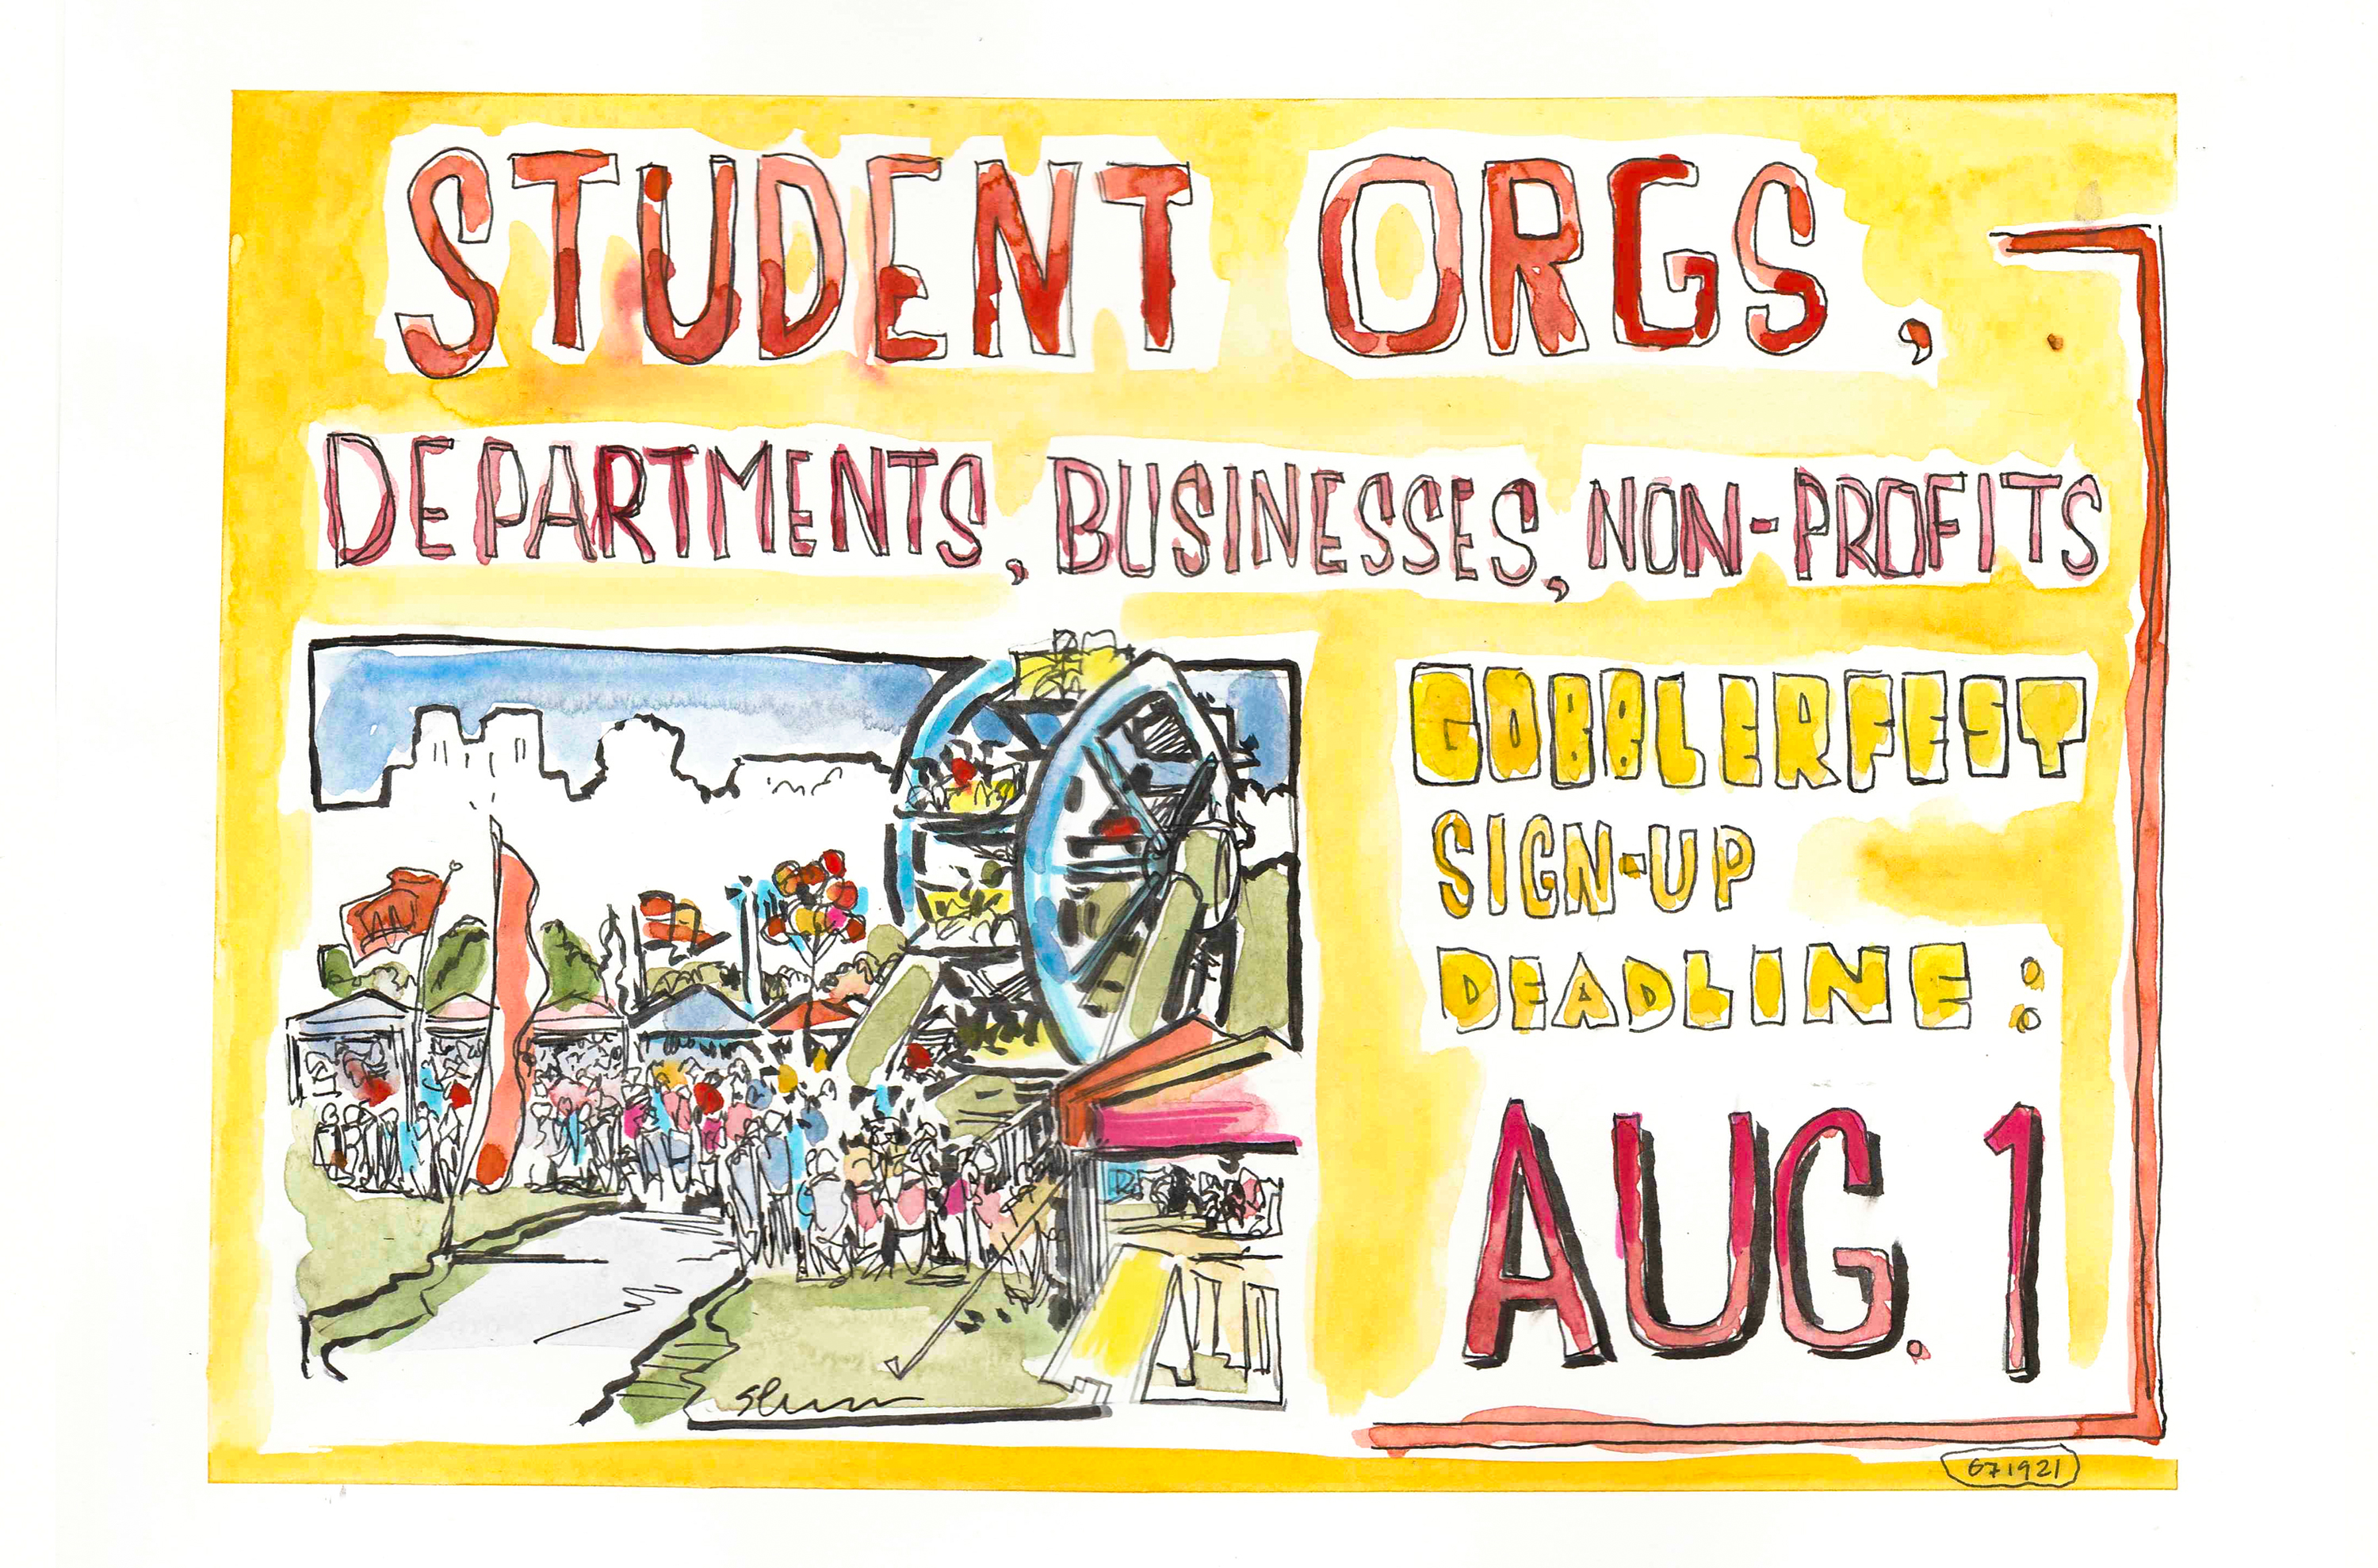 Illustration in ink and watercolor announcing the Aug 1 deadline for Gobblerfest Sign-Up